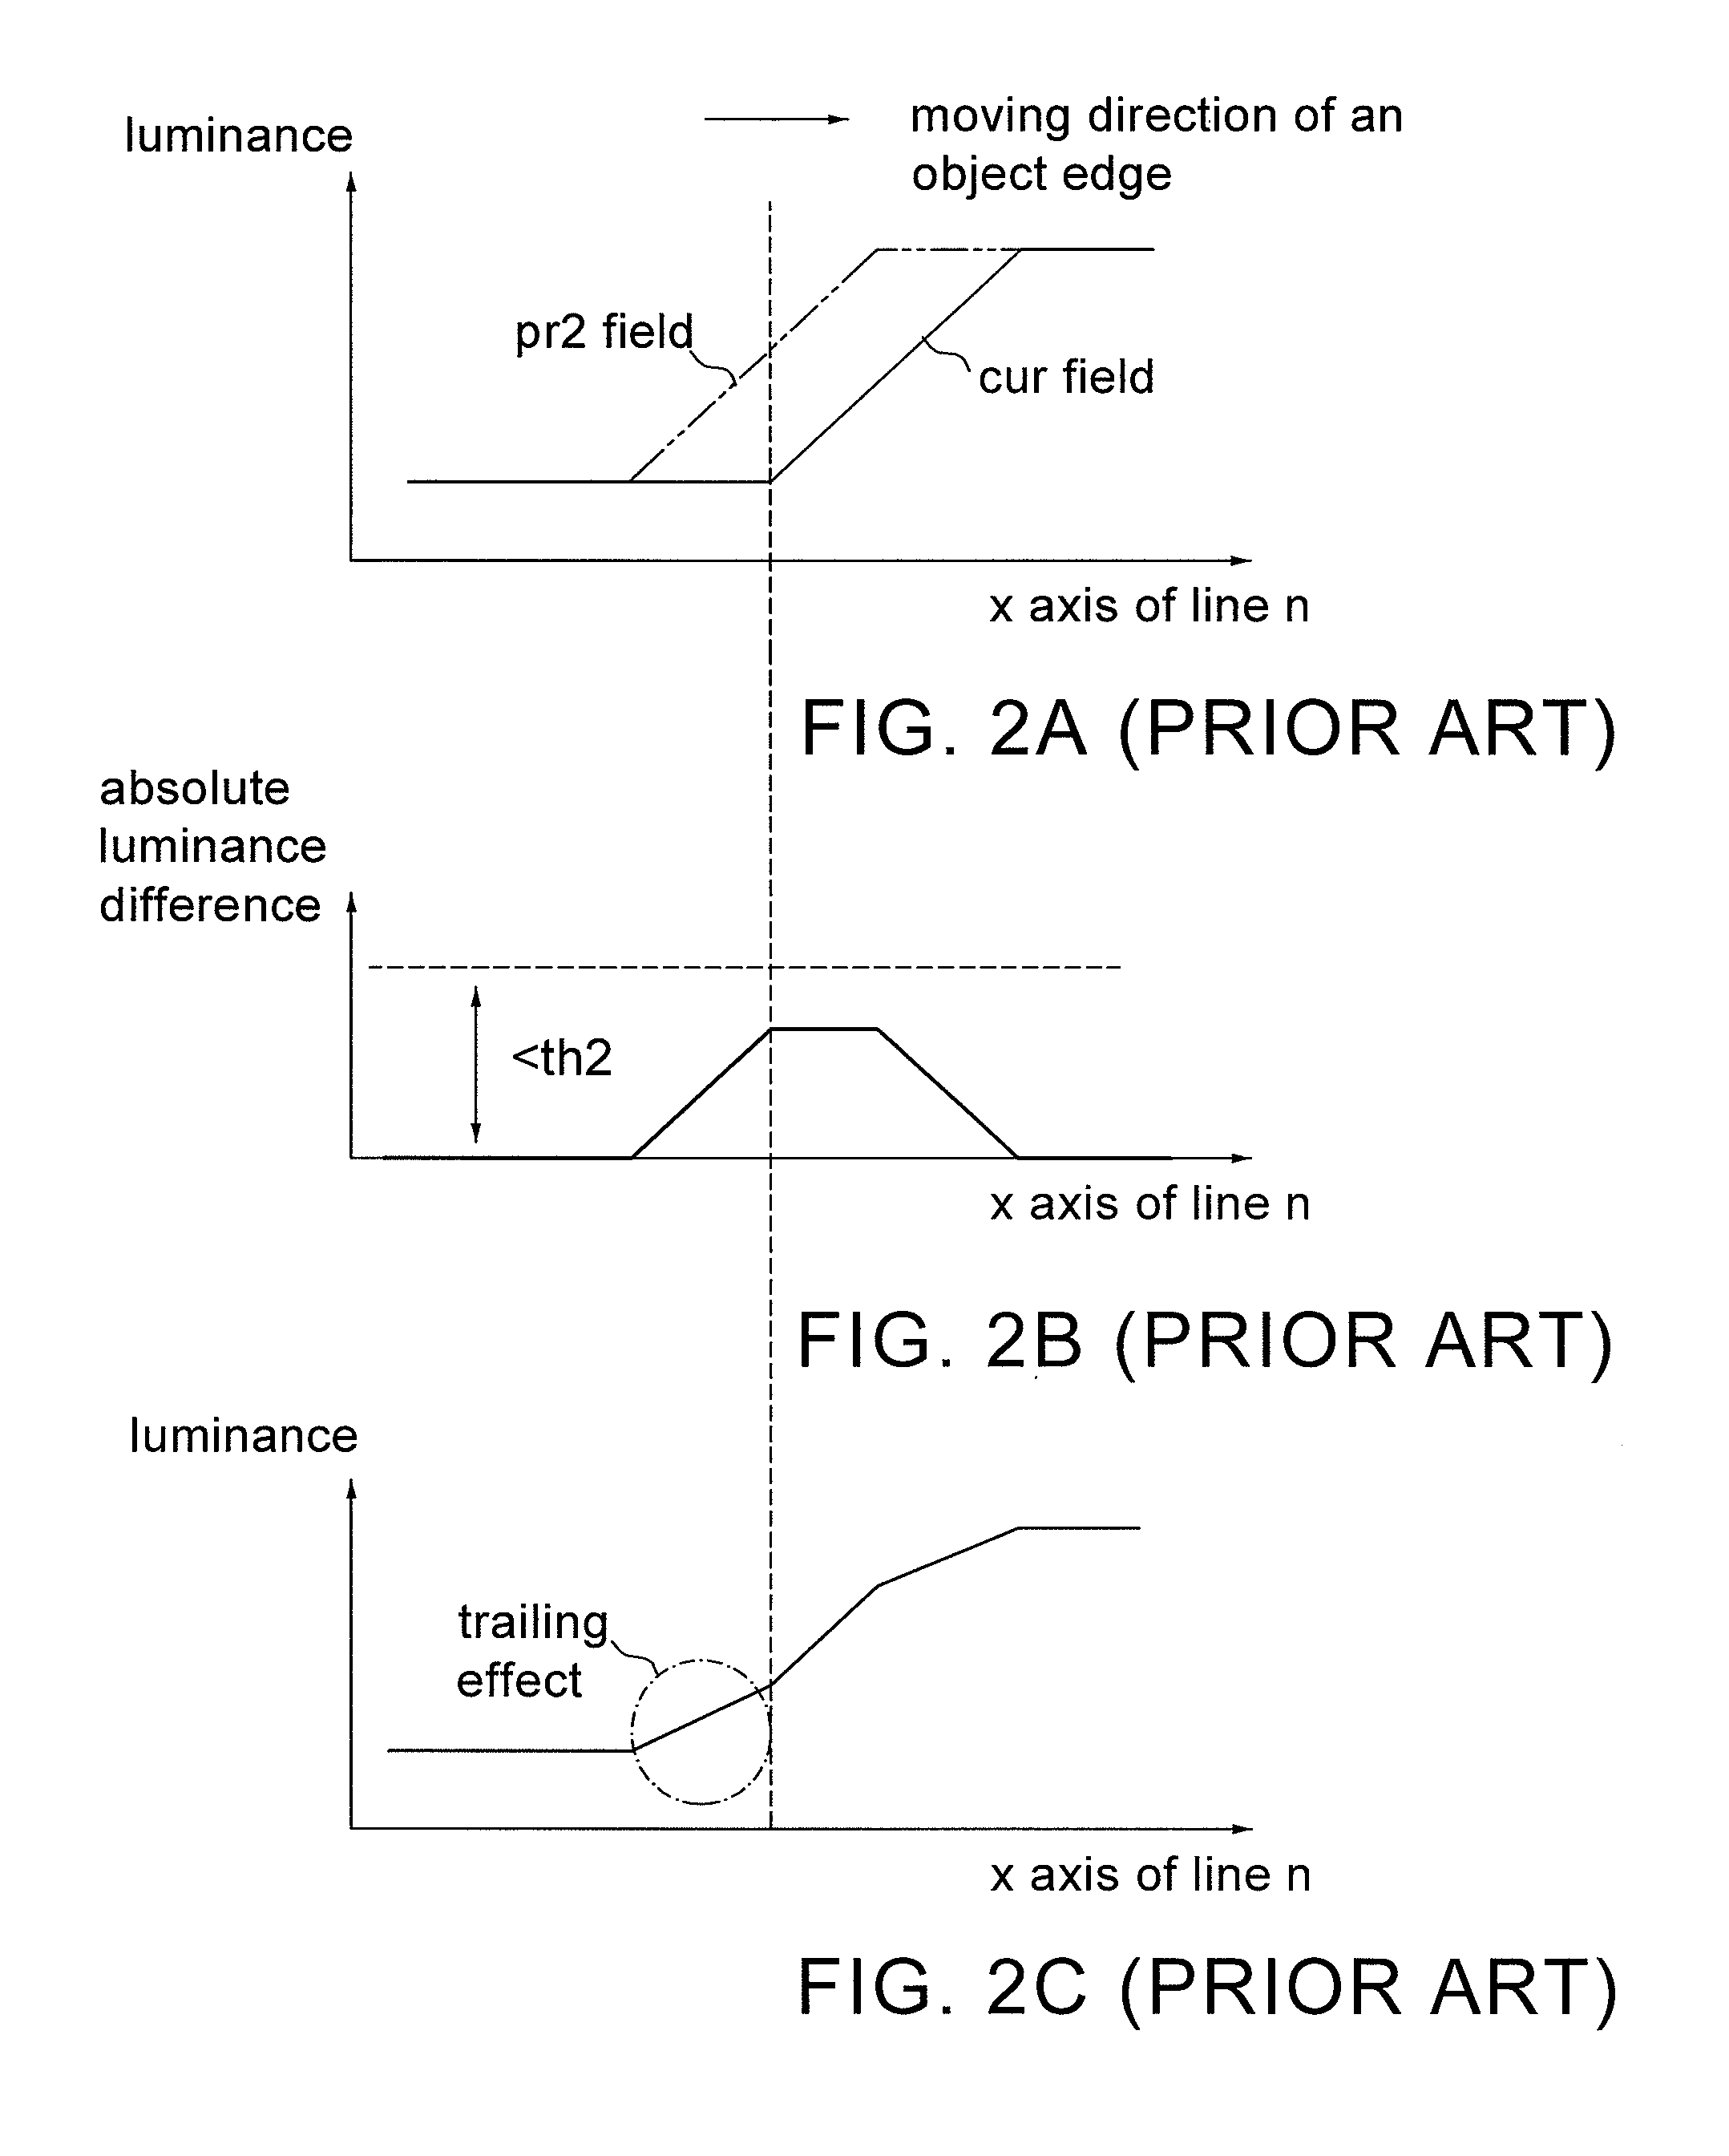 Dynamic noise filter and sigma filtering method